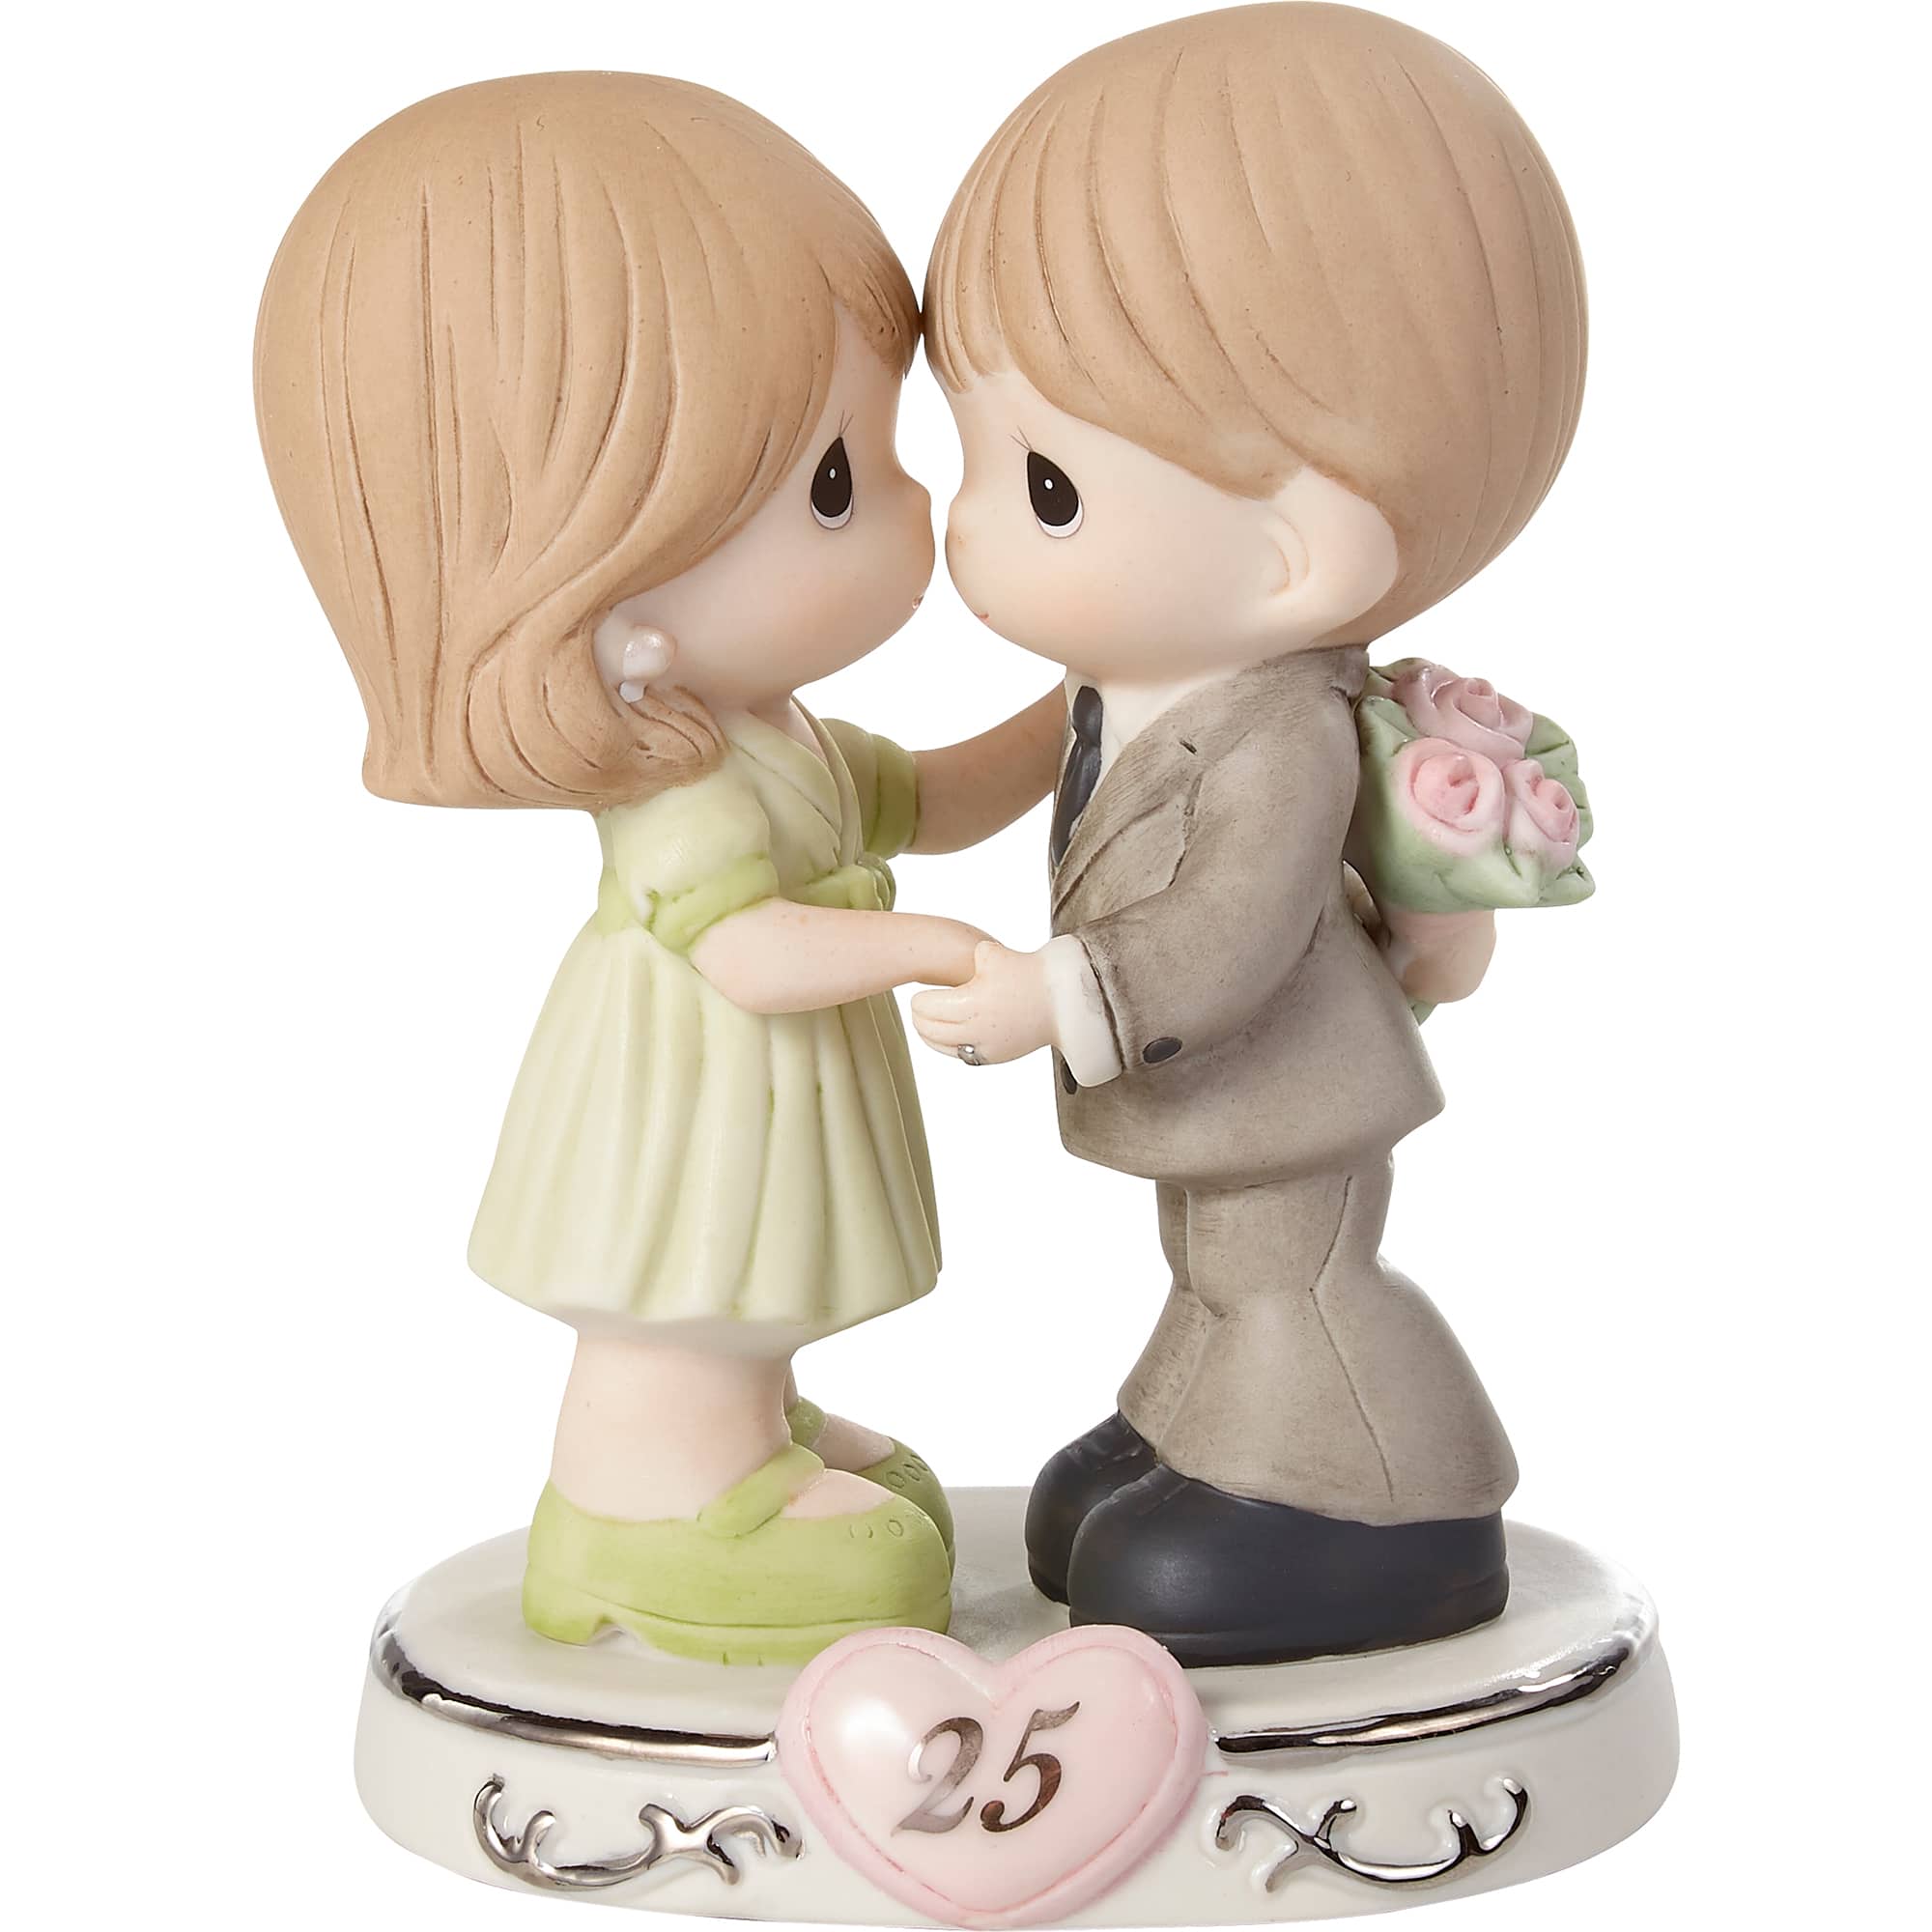 Precious Moments Through The Years 25th Anniversary Bisque Porcelain Figurine